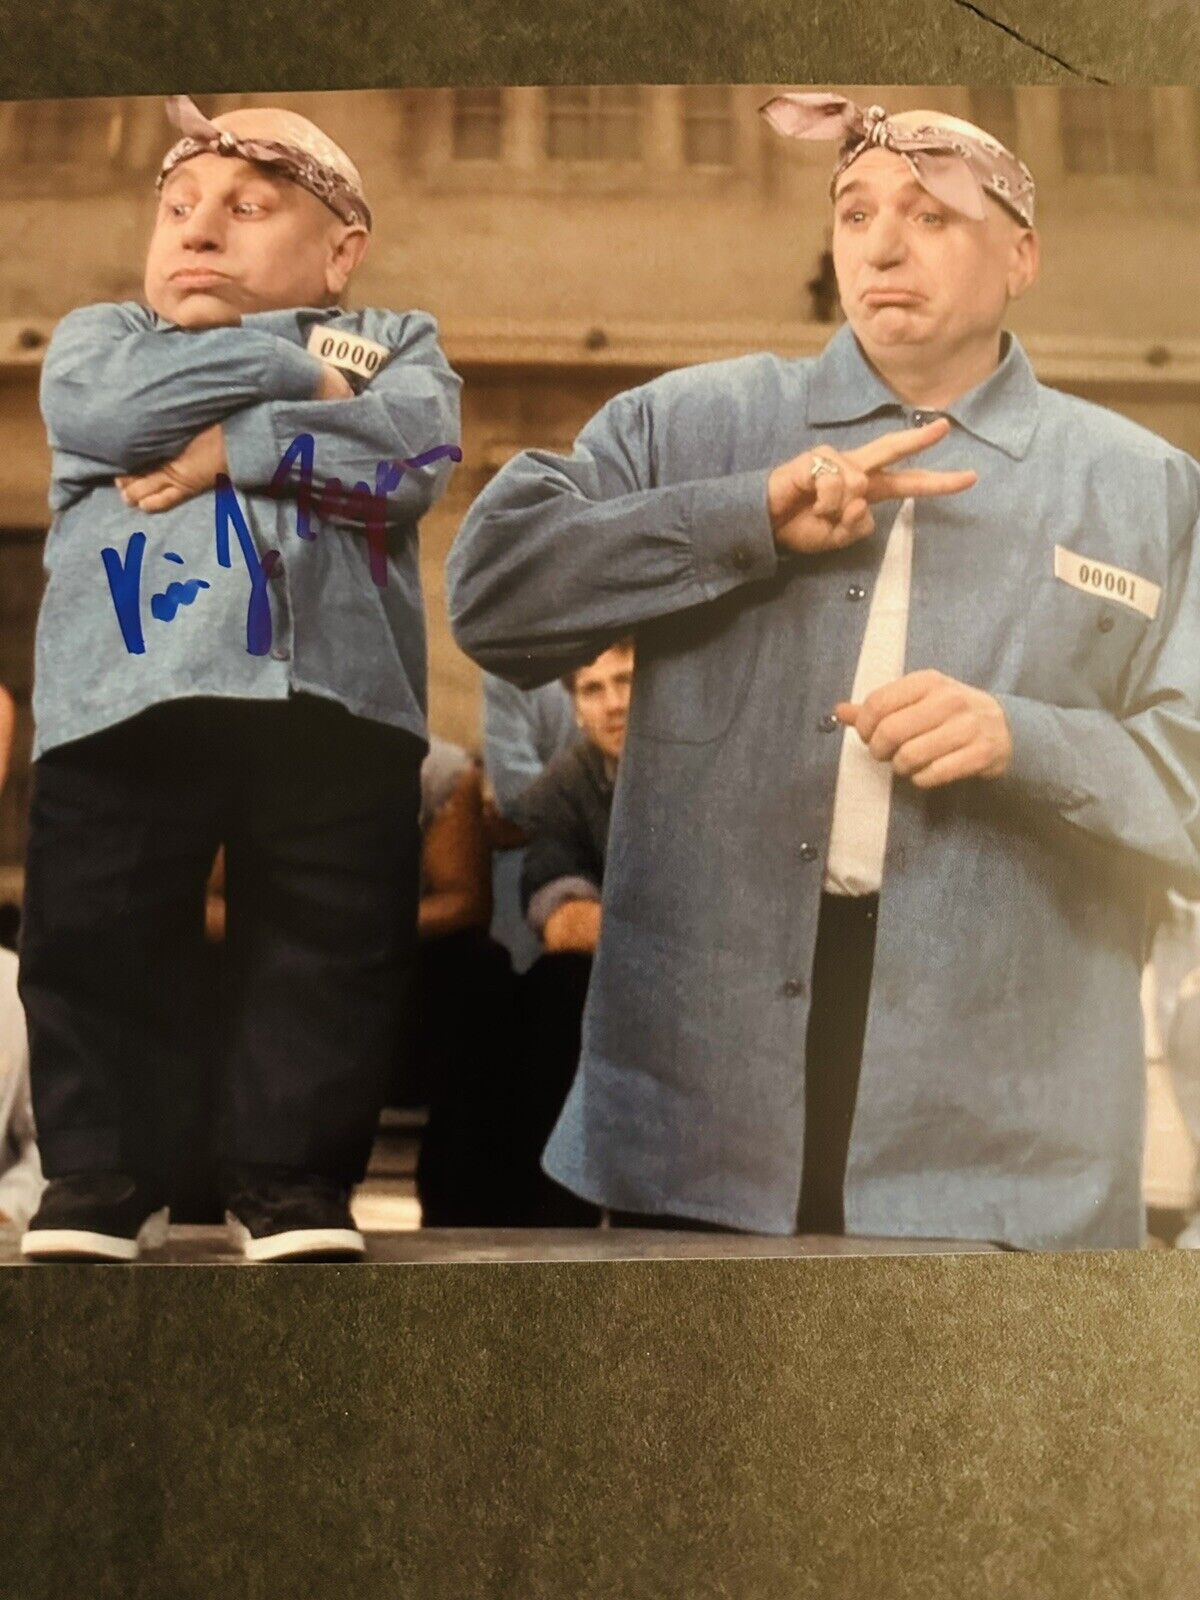 Verne Troyer Mini Me Signed 8x10 Austin Powers Photo AUTO Autographed with COA